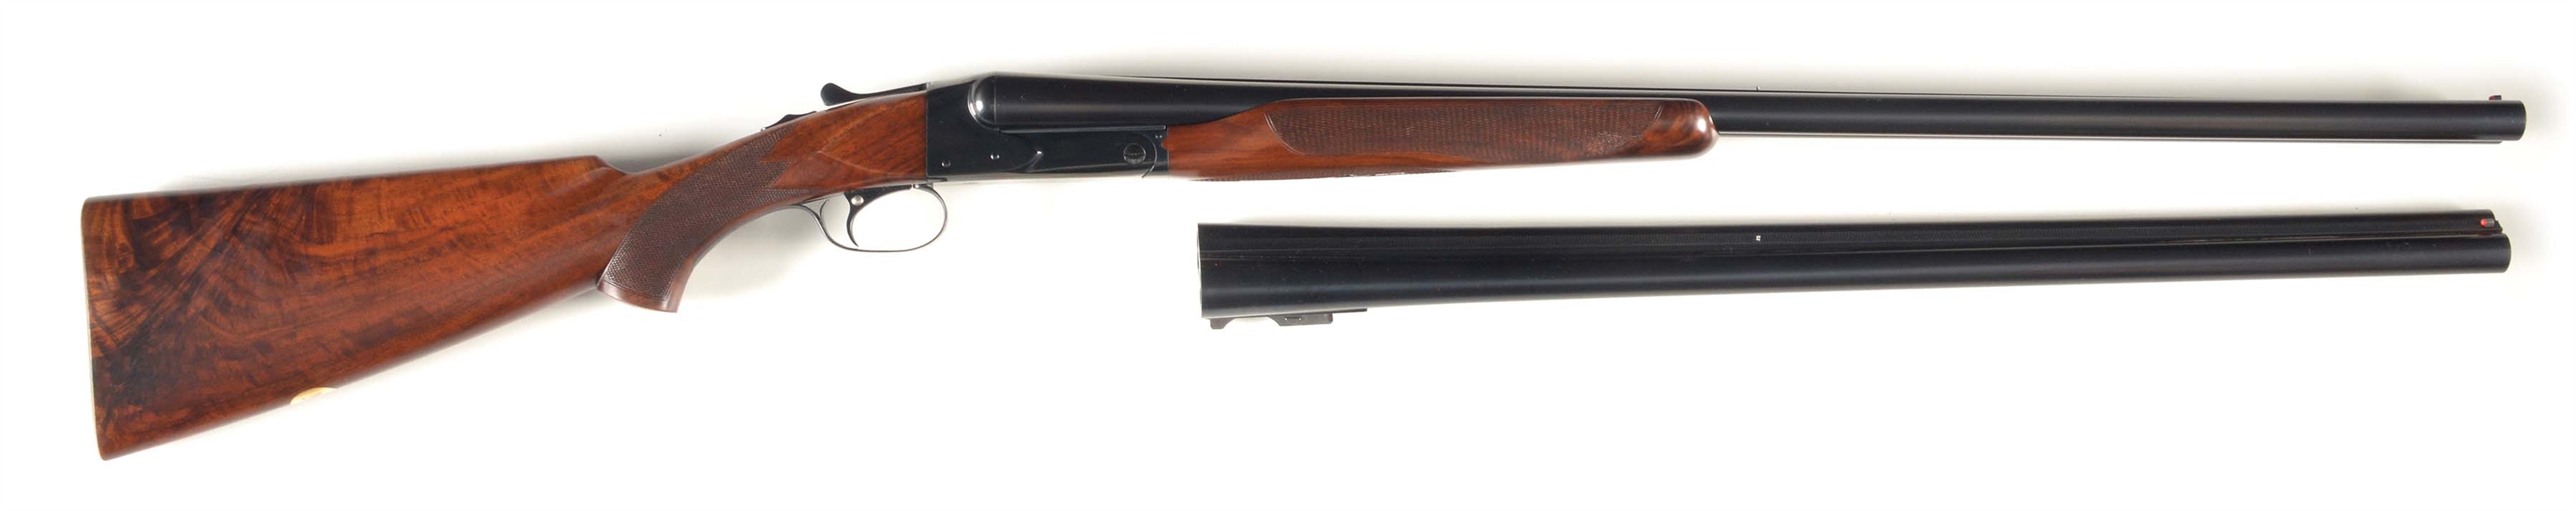 (C) WINCHESTER MODEL 21 SIDE BY SIDE 12 BORE SHOTGUN WITH EXTRA BARREL.